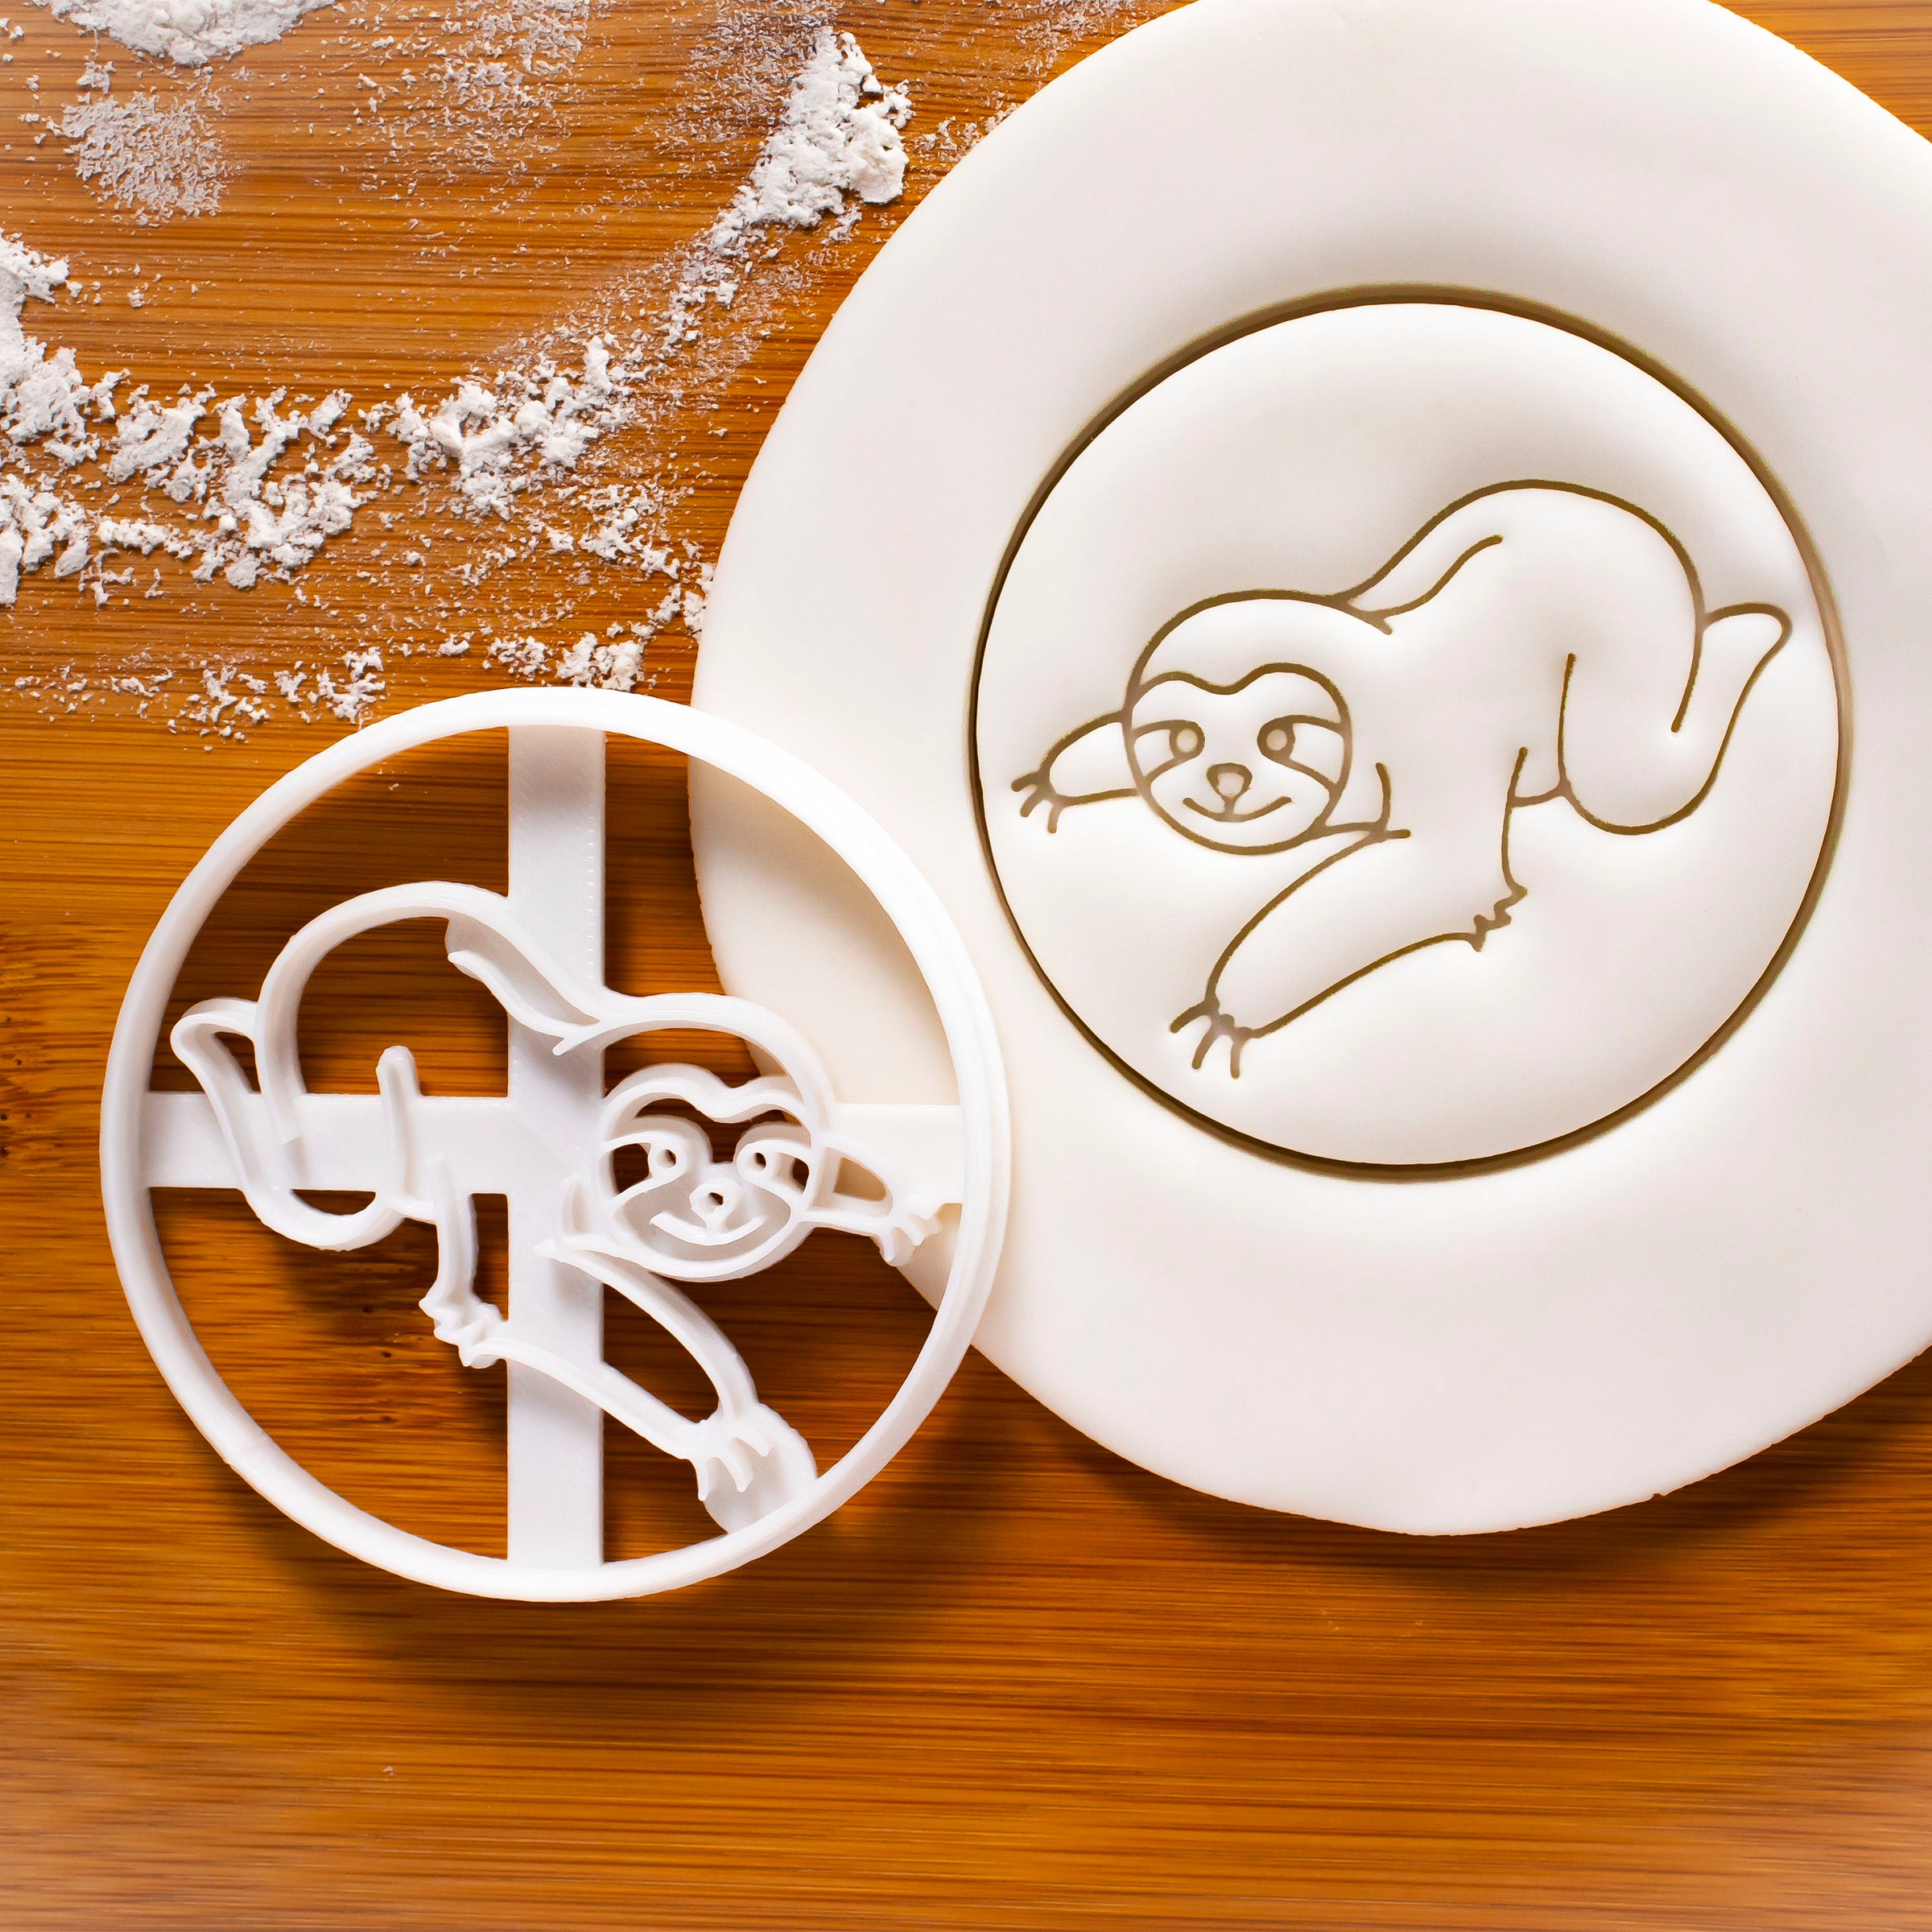 Sloth crawling Cookie Cutter